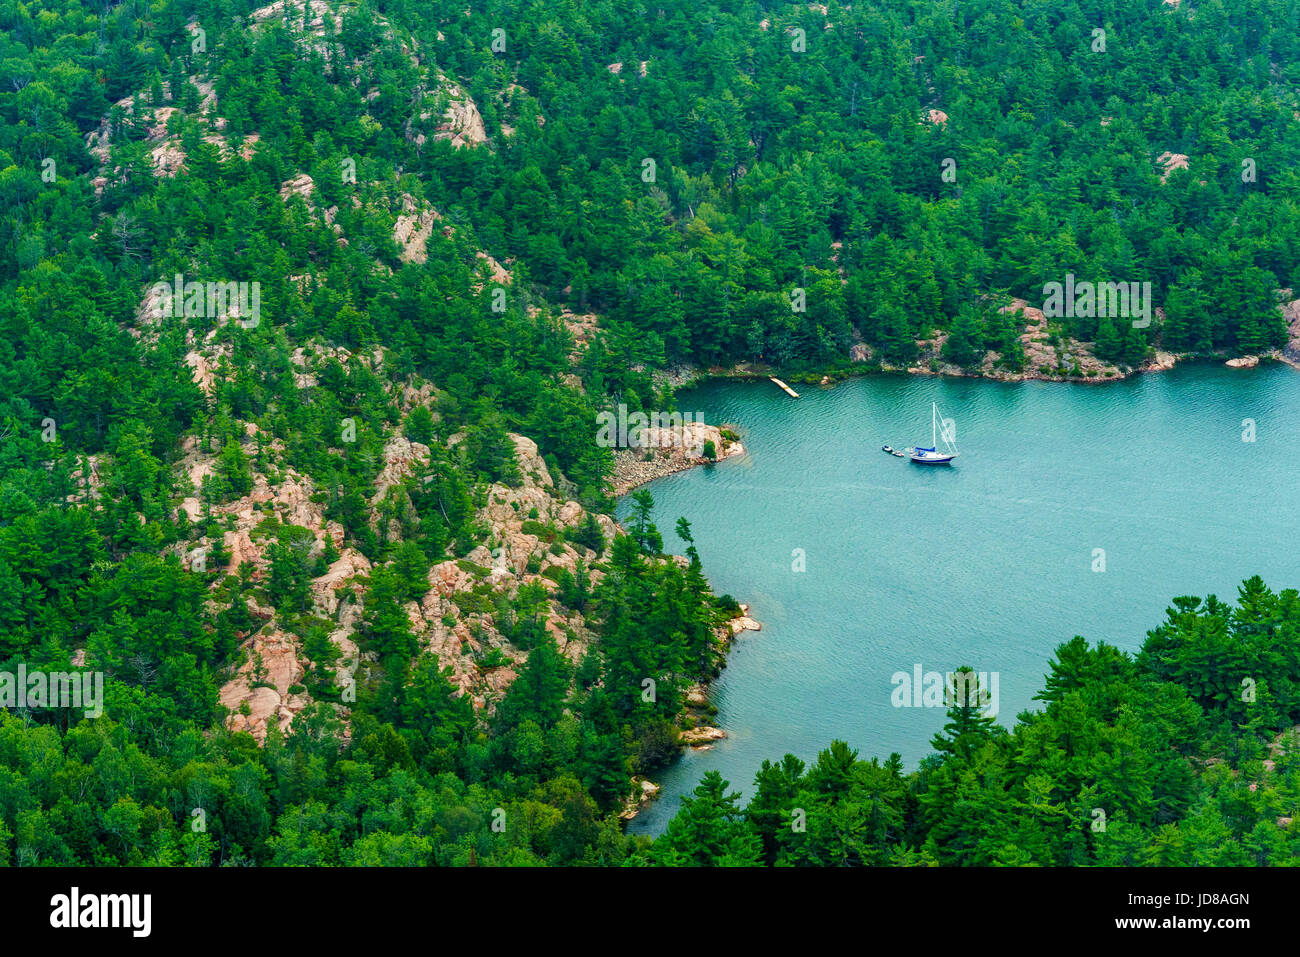 Boat on lake surrounded by mountains and trees, Toronto, Ontario, Canada. aerial picture from ontario canada 2016 Stock Photo